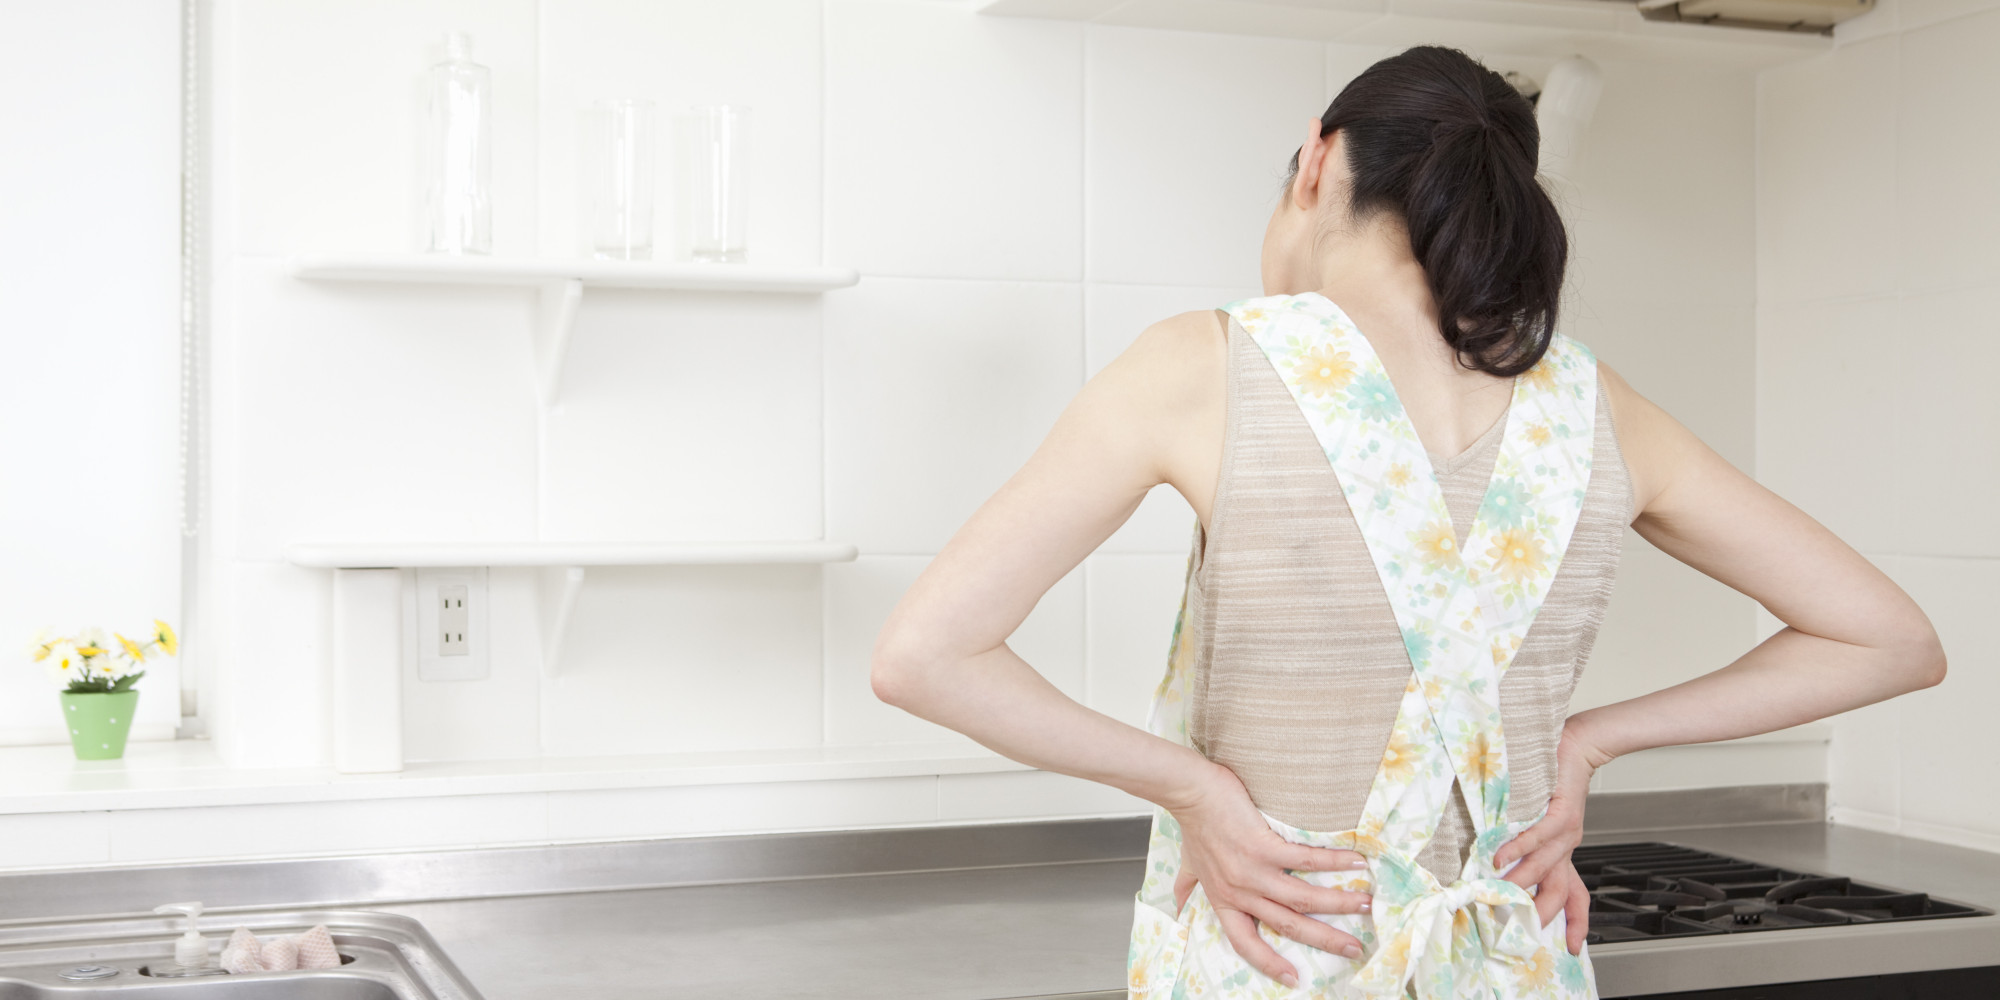 3 Natural Ways to Relieve Back Pain - Upper Cervical Awareness